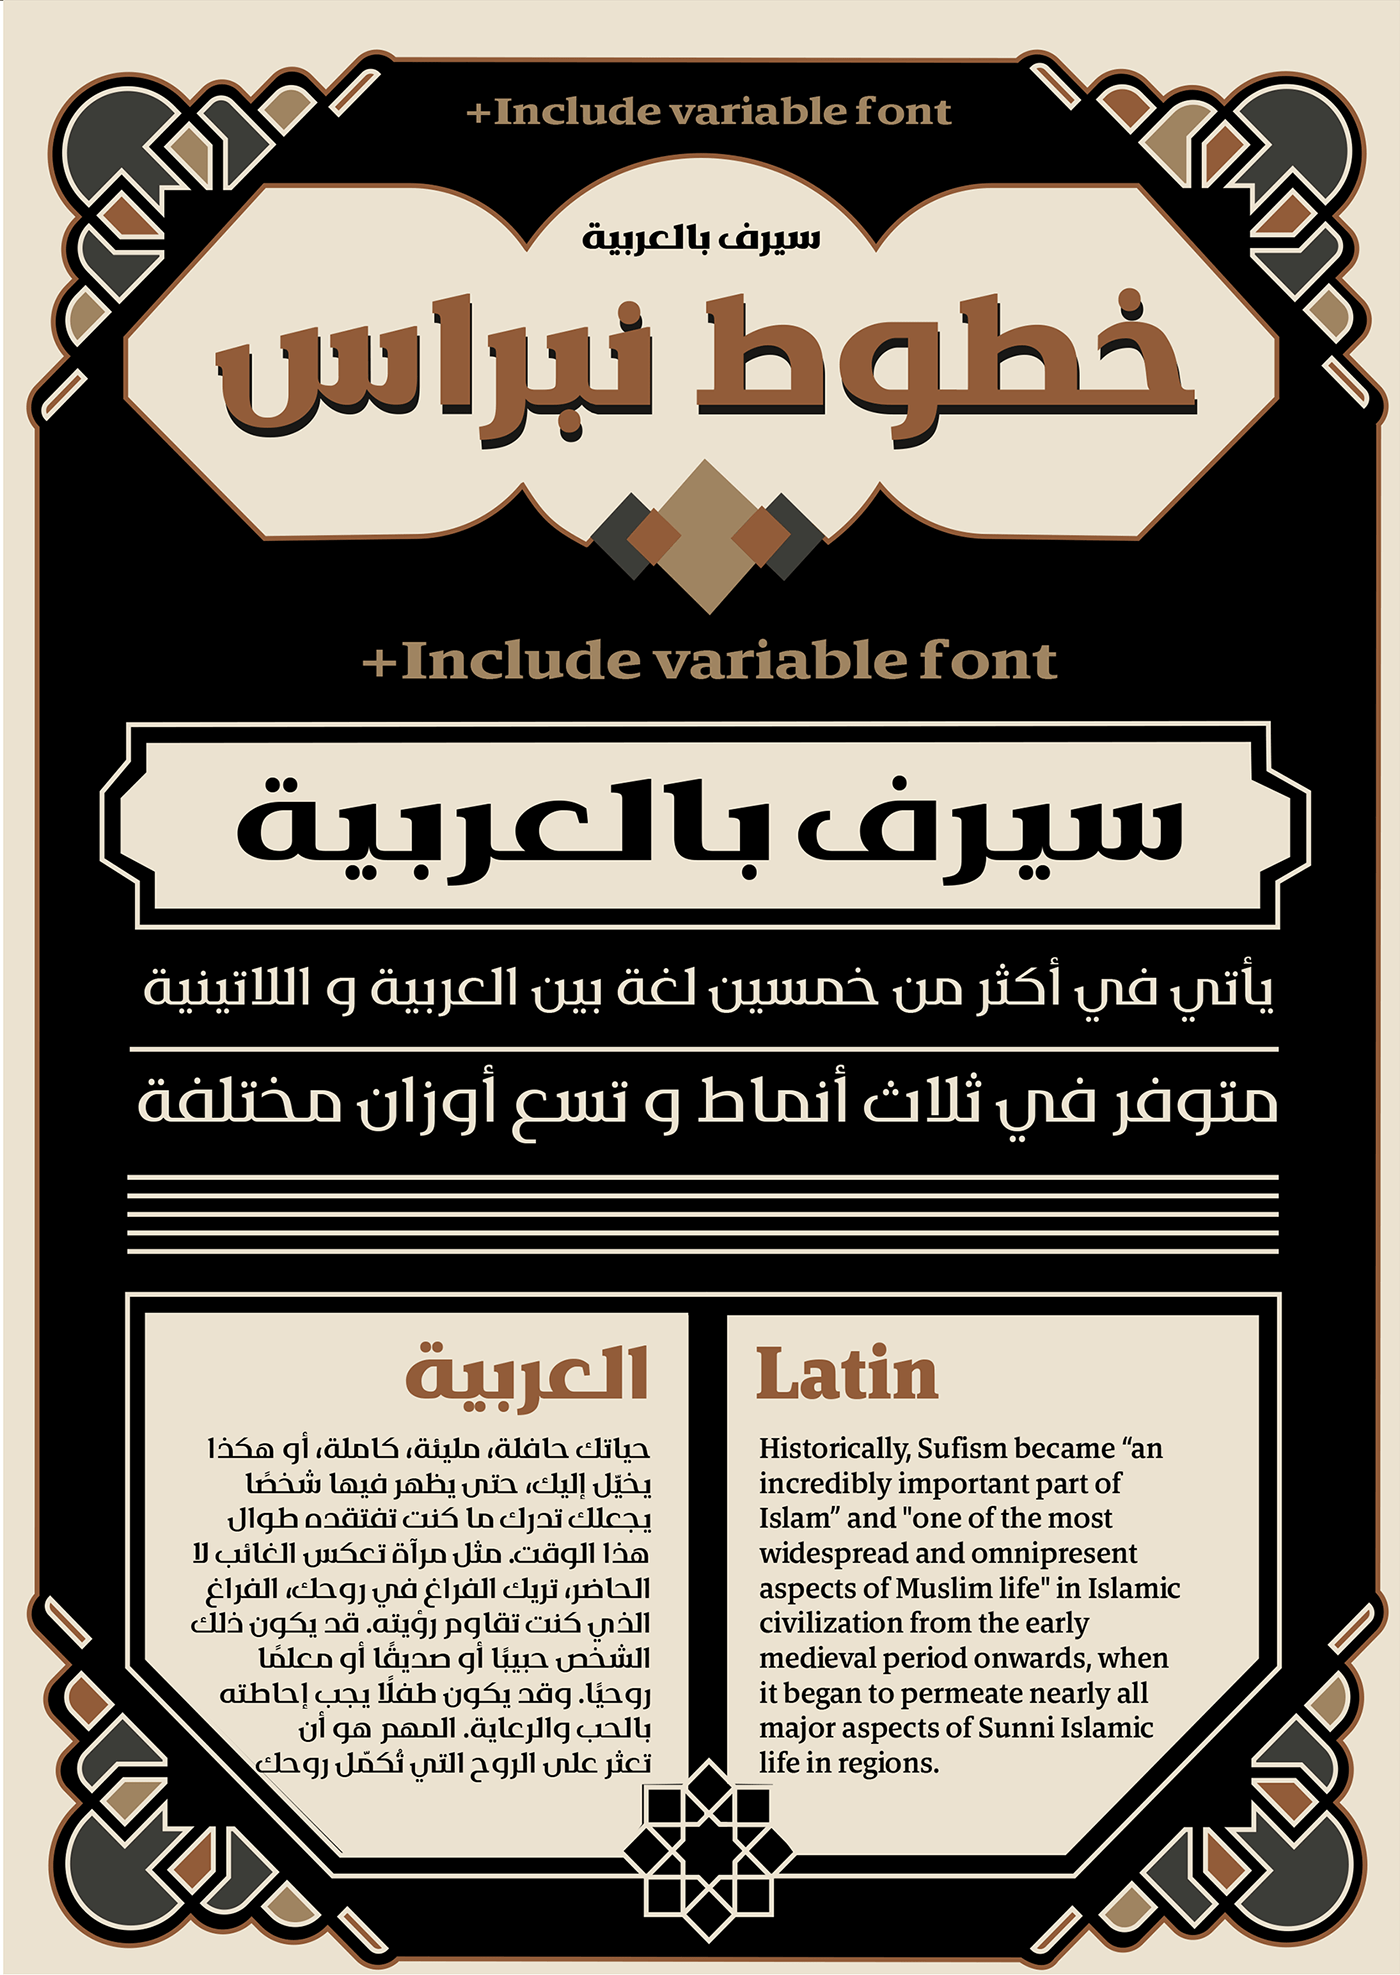 Nebras is a contemporary serif typeface that is curved and round, elegant, deceptively classical, but also straight and edgy with its alternates. It comes in 3 different widths and 9 weights supporting +50 languages ranging from Arabic to Latin and more